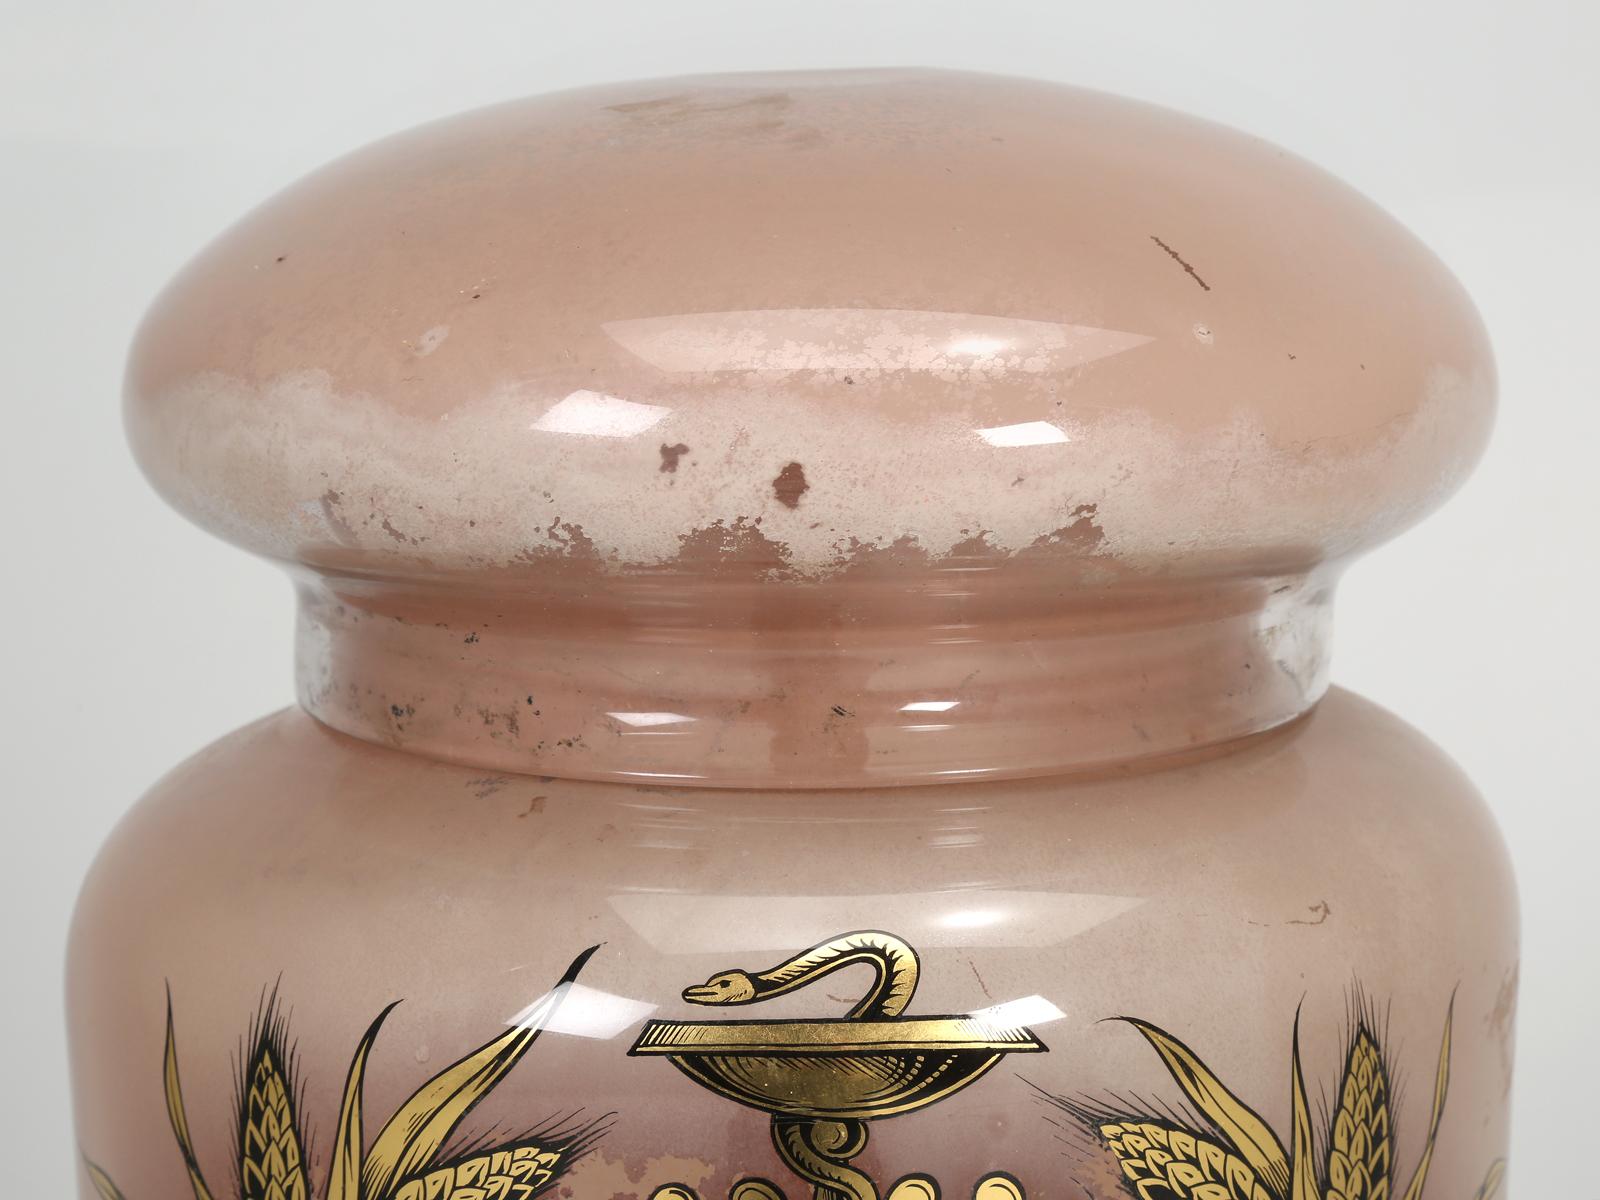 Huge reverse hand-painted (Verre églomisé*) antique Apothecary Jar which appears to be signed; A. Collier Paris. These highly decorative and overscale glass jars were commonly found in the finer pharmacist establishments around 1900. Papaver, as